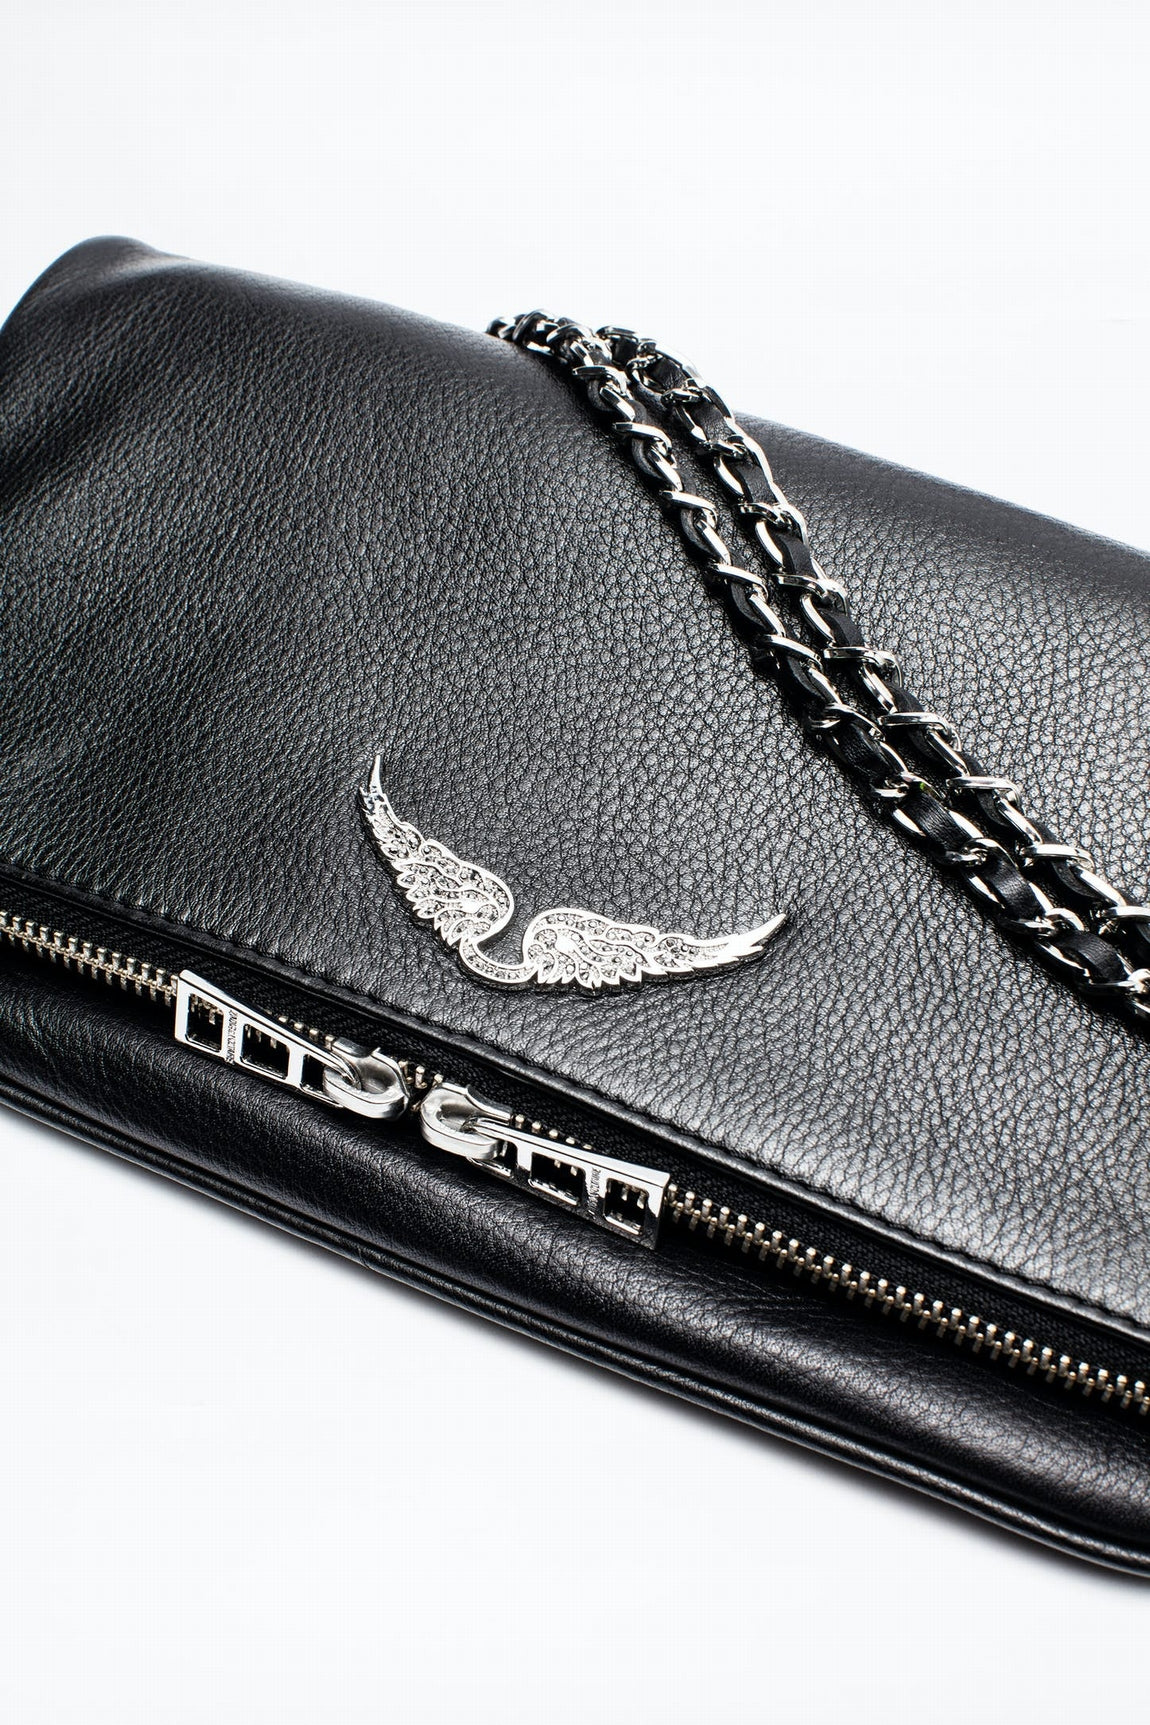 Rock grained leather bag, black-silver